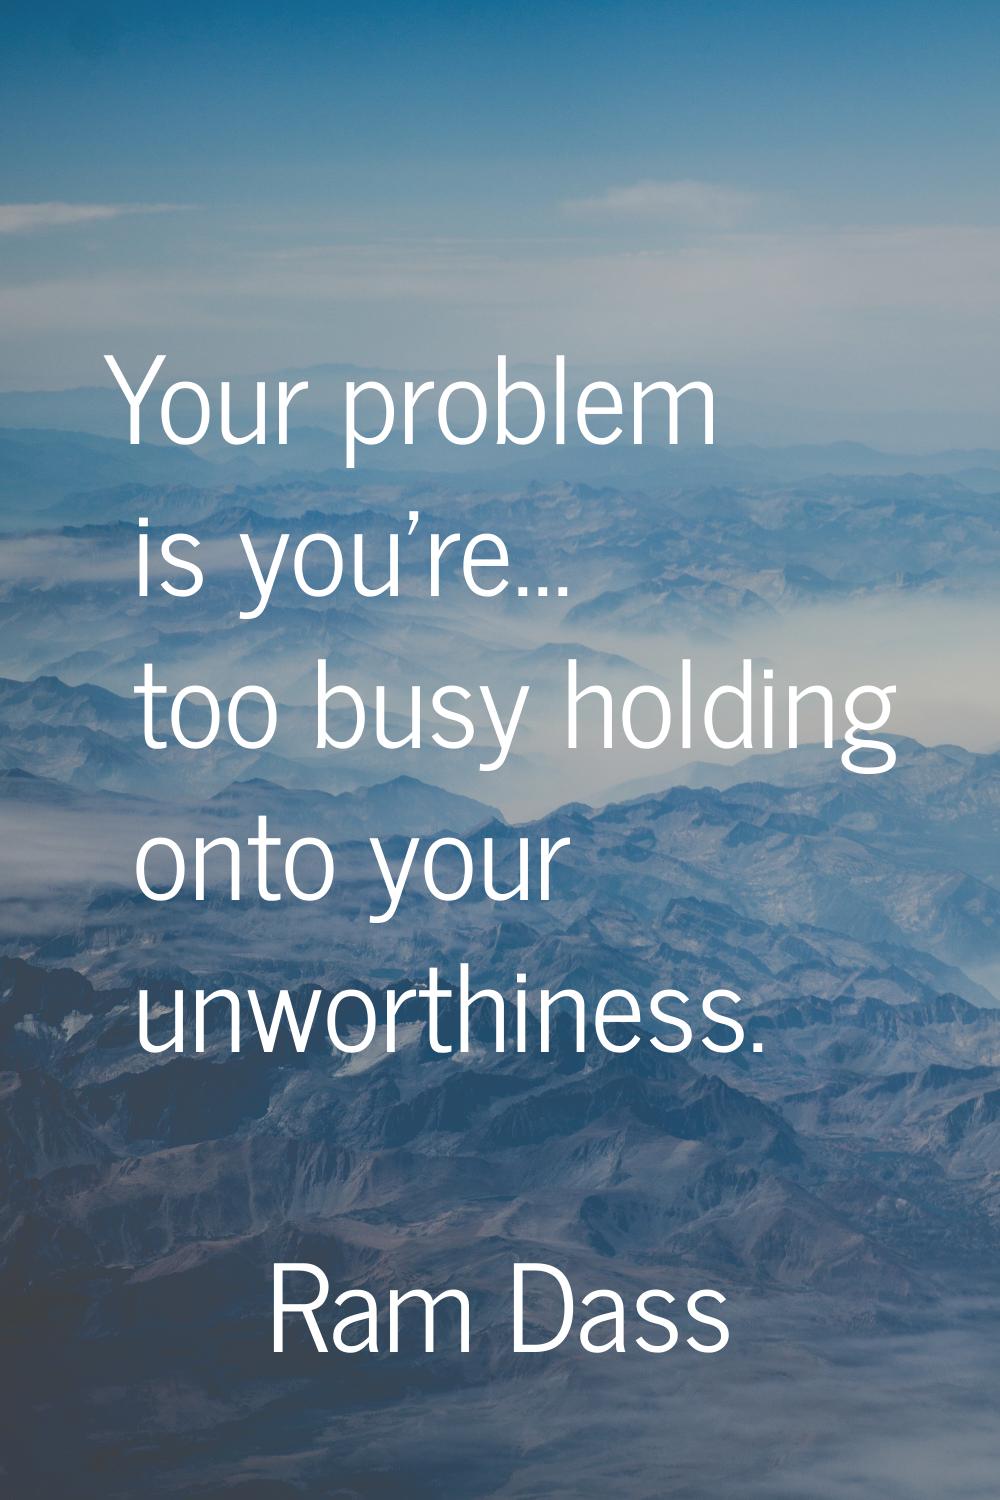 Your problem is you're... too busy holding onto your unworthiness.